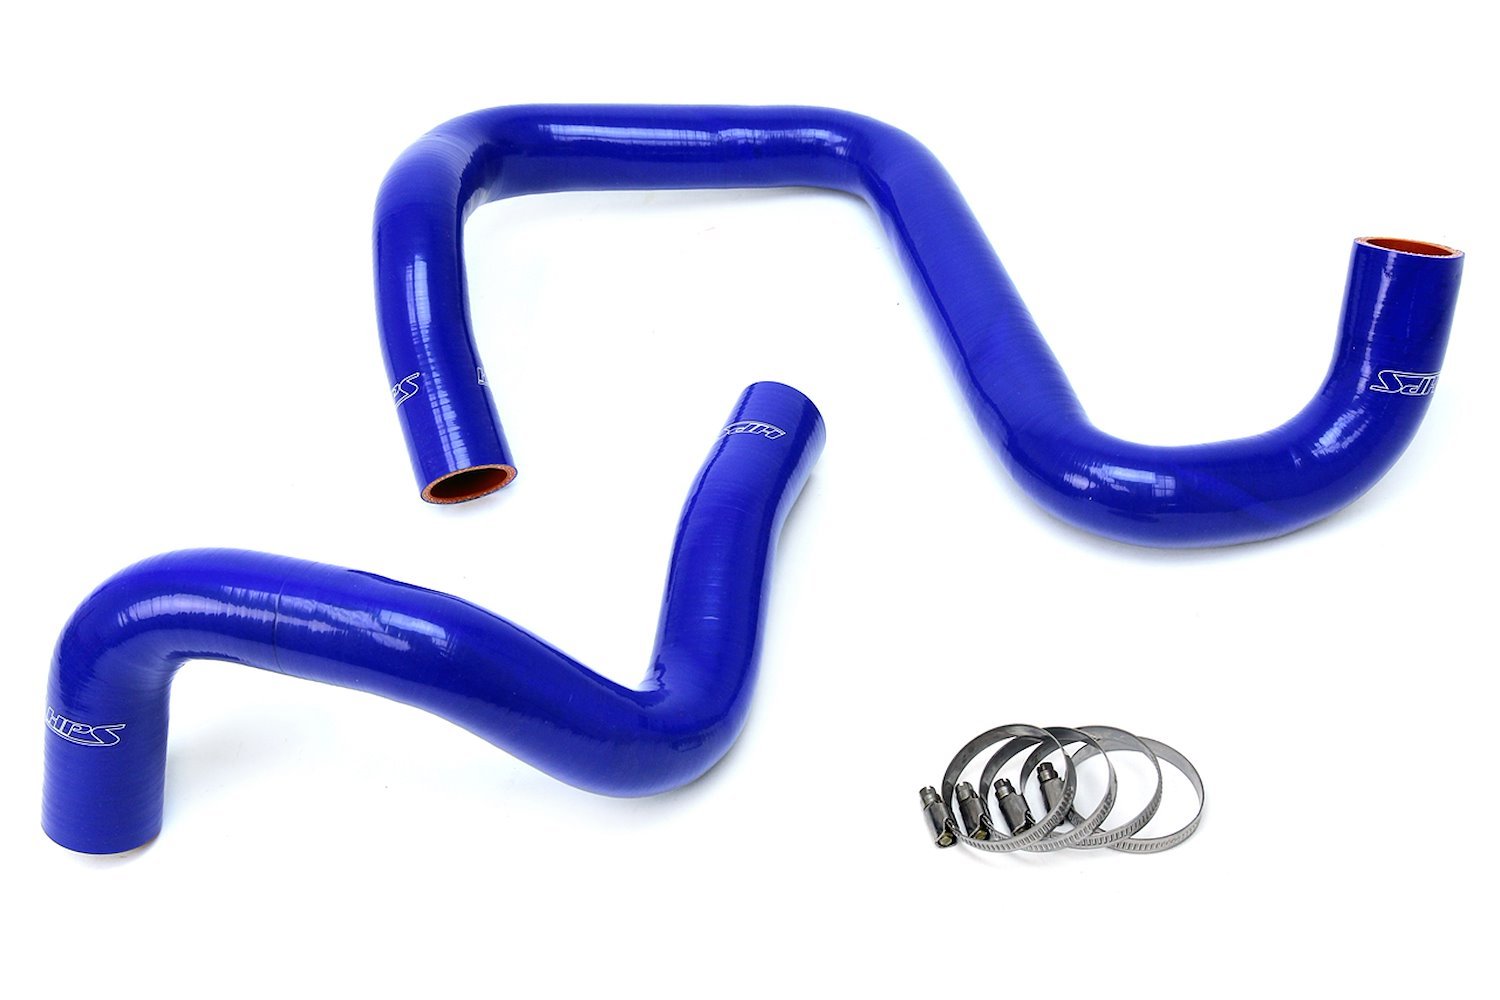 57-1285R-BLUE Radiator Hose Kit, High-Temp 3-Ply Reinforced Silicone, Replace OEM Rubber Radiator Coolant Hoses